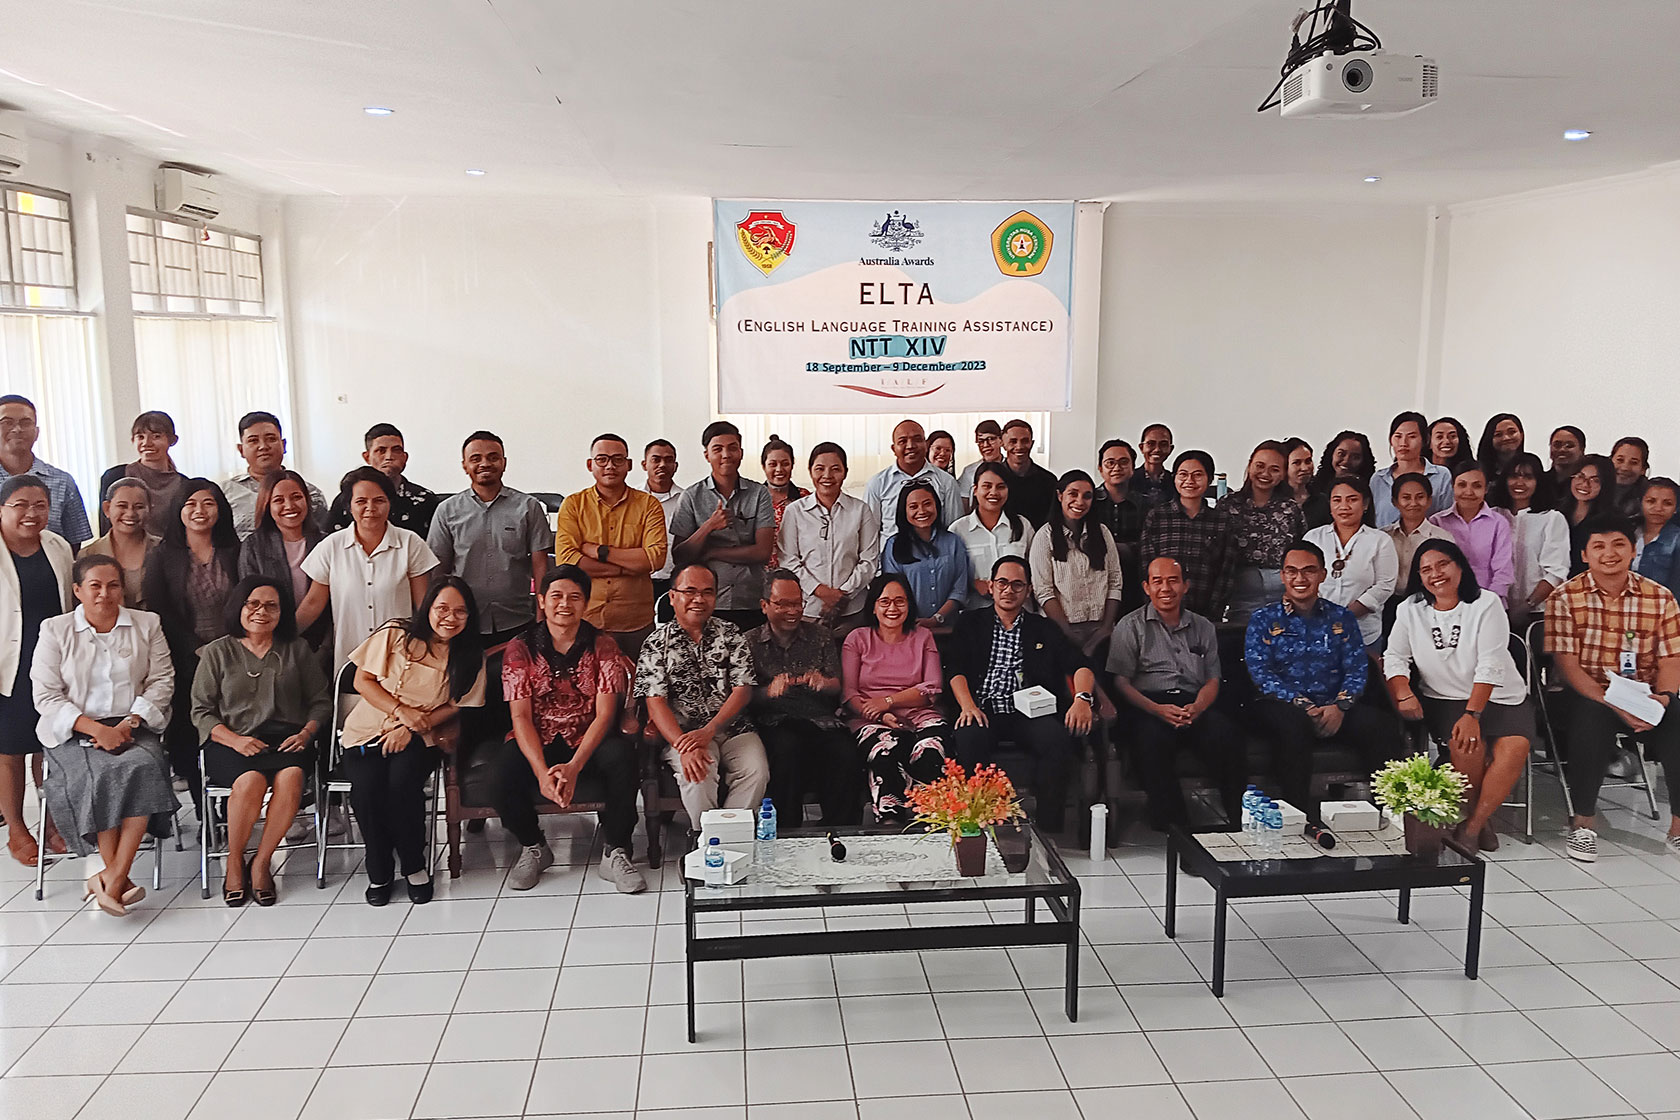 A group photo of participants during the ELTA Opening Ceremony in Kupang, NTT.